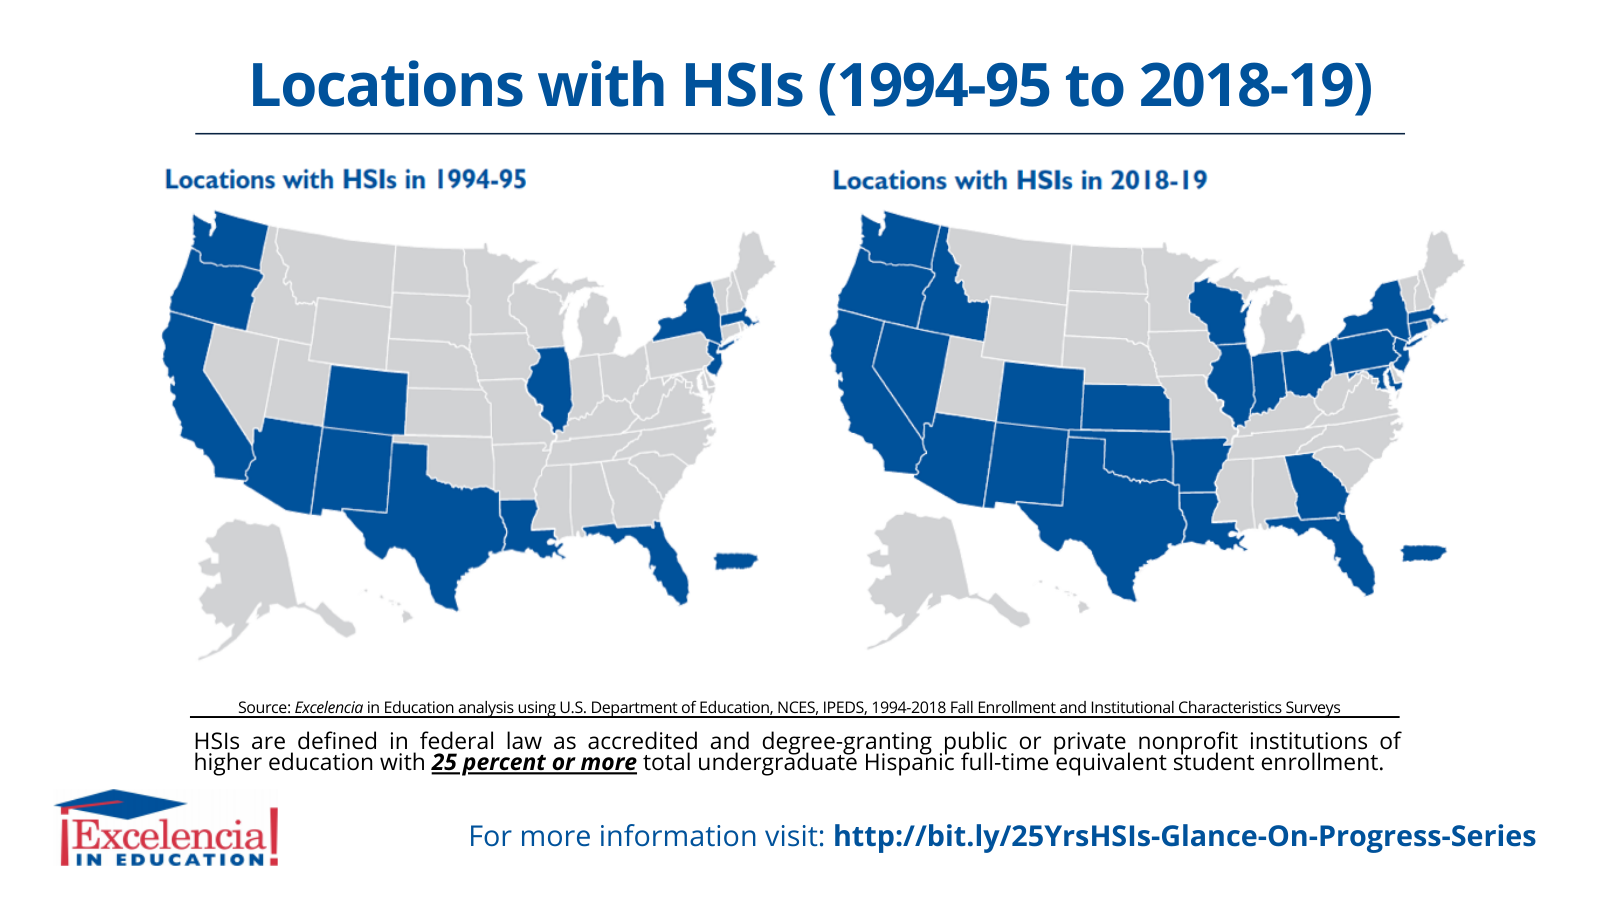 Infographic-Locations with HSIs 1994-95 to 2018-19